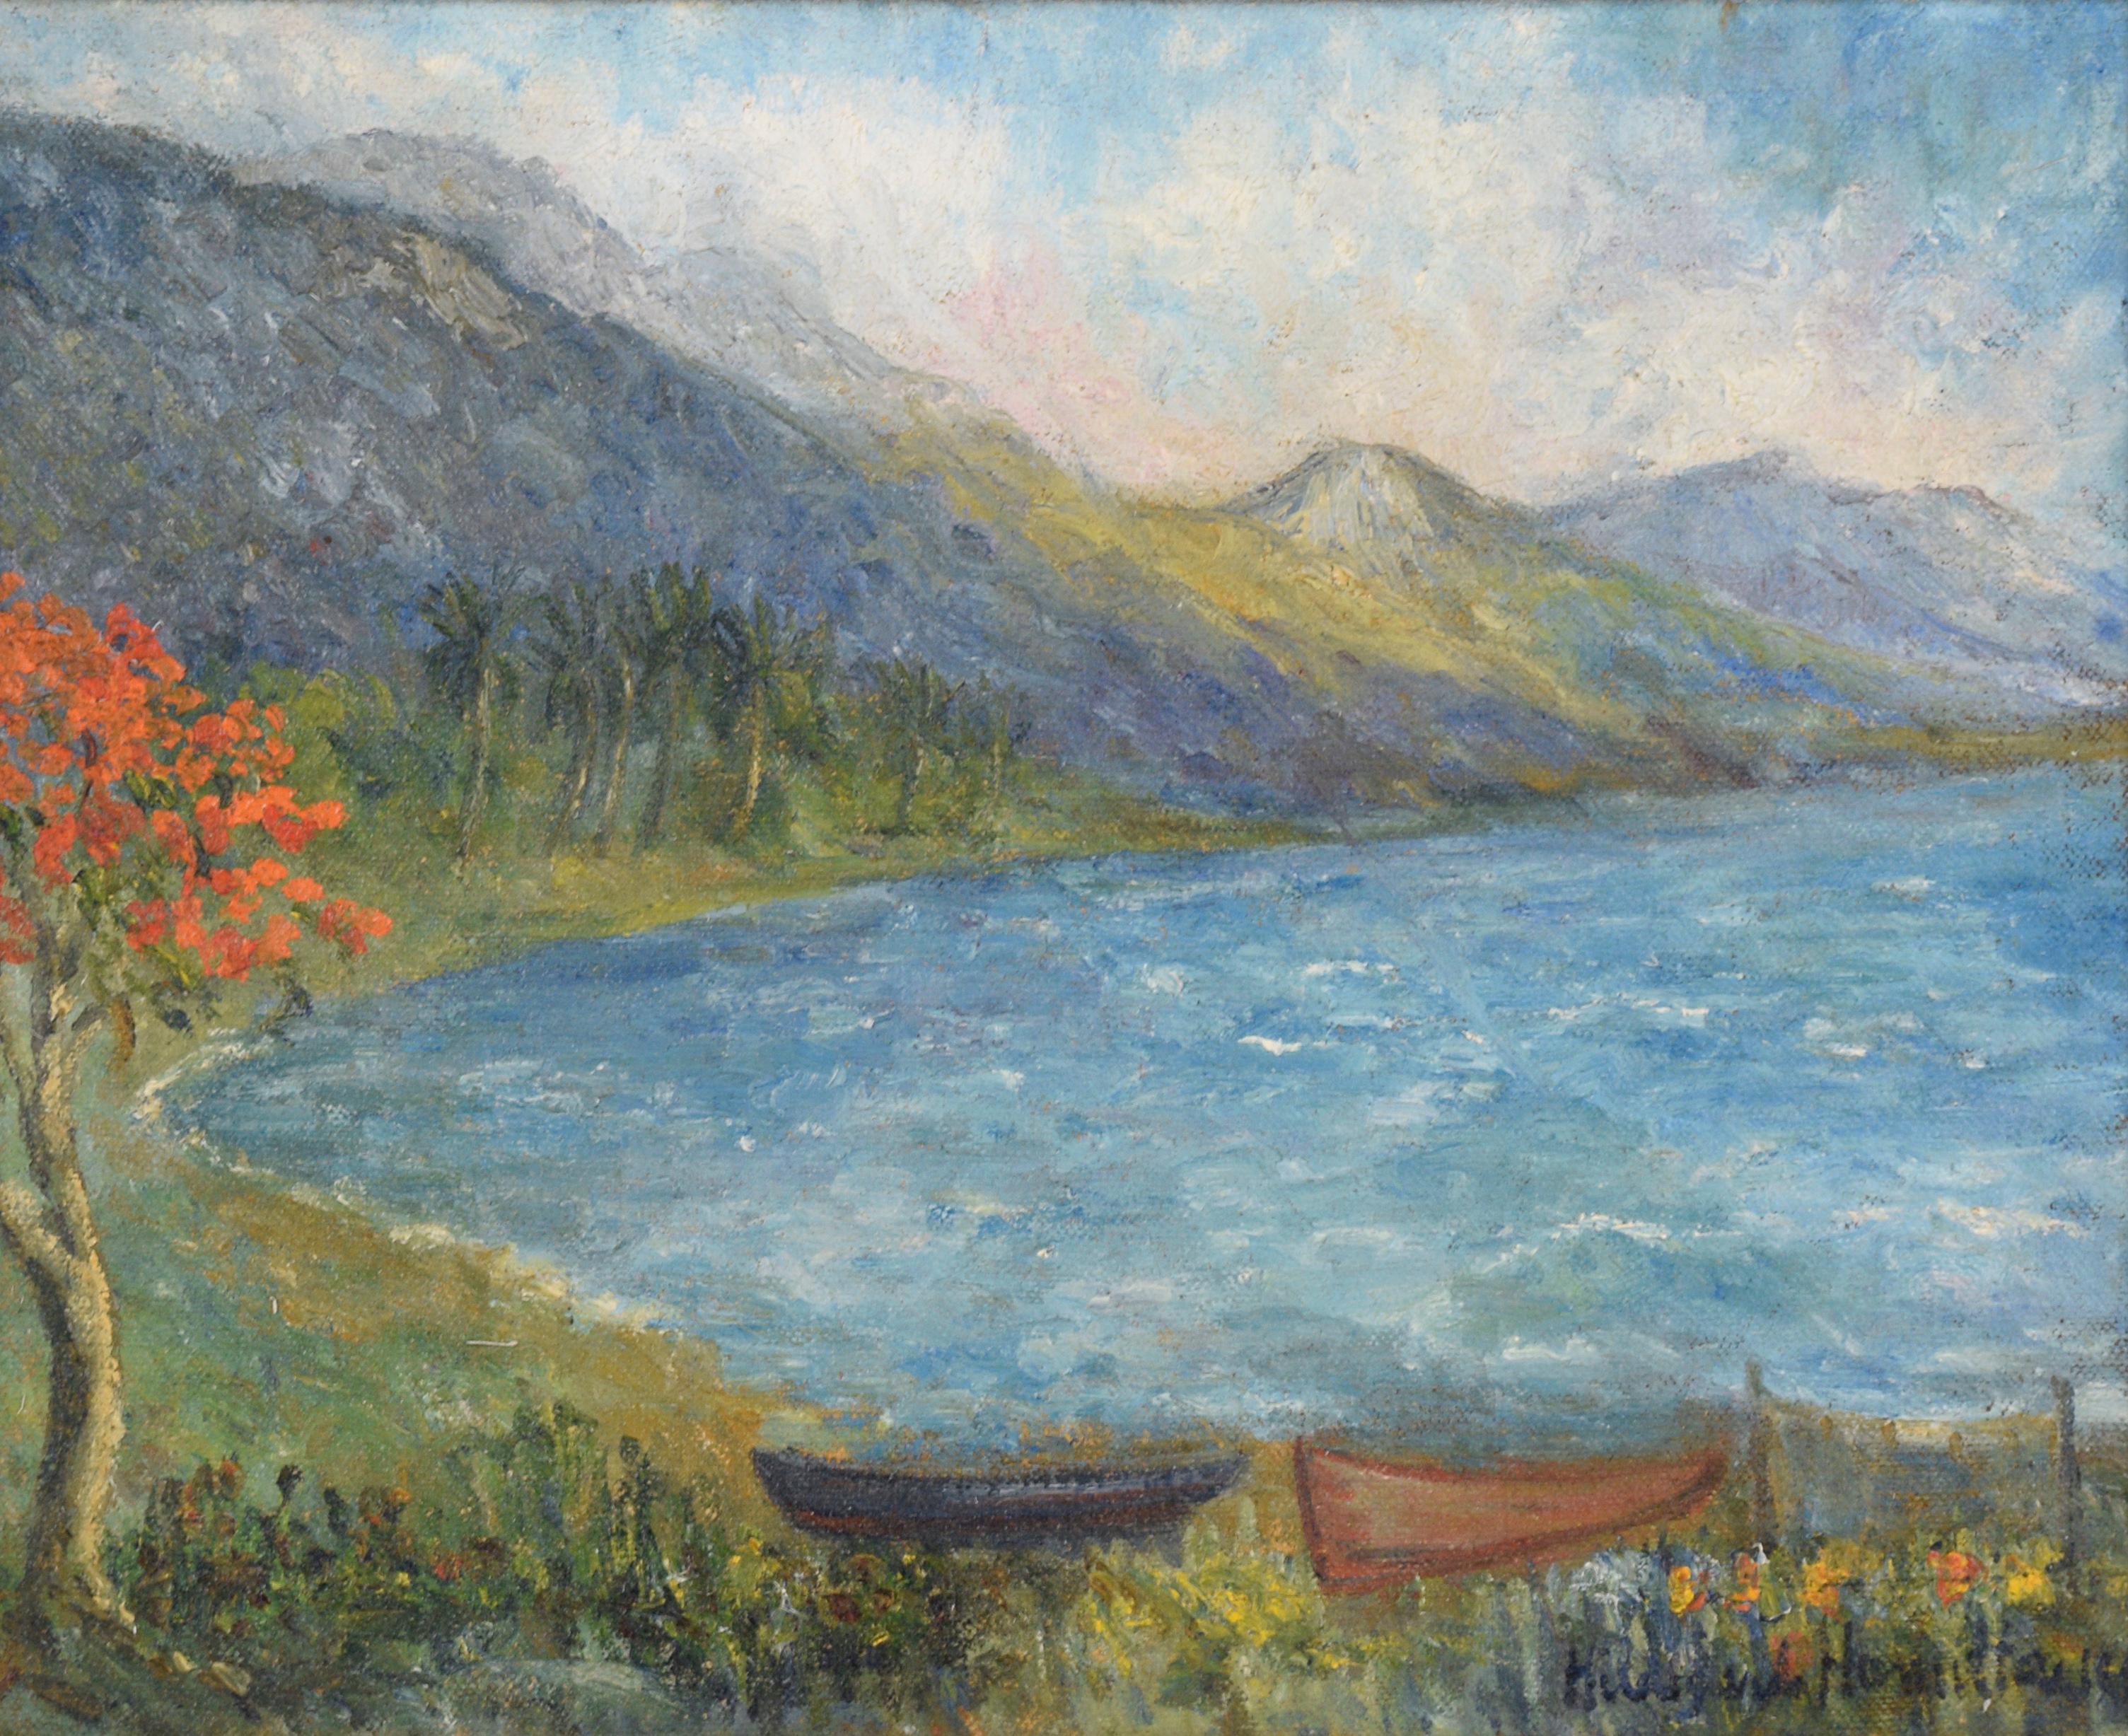 Island Mountains and Boats by the Coast, Mid 20th Century Landscape - Painting by Hildegarde Hamilton